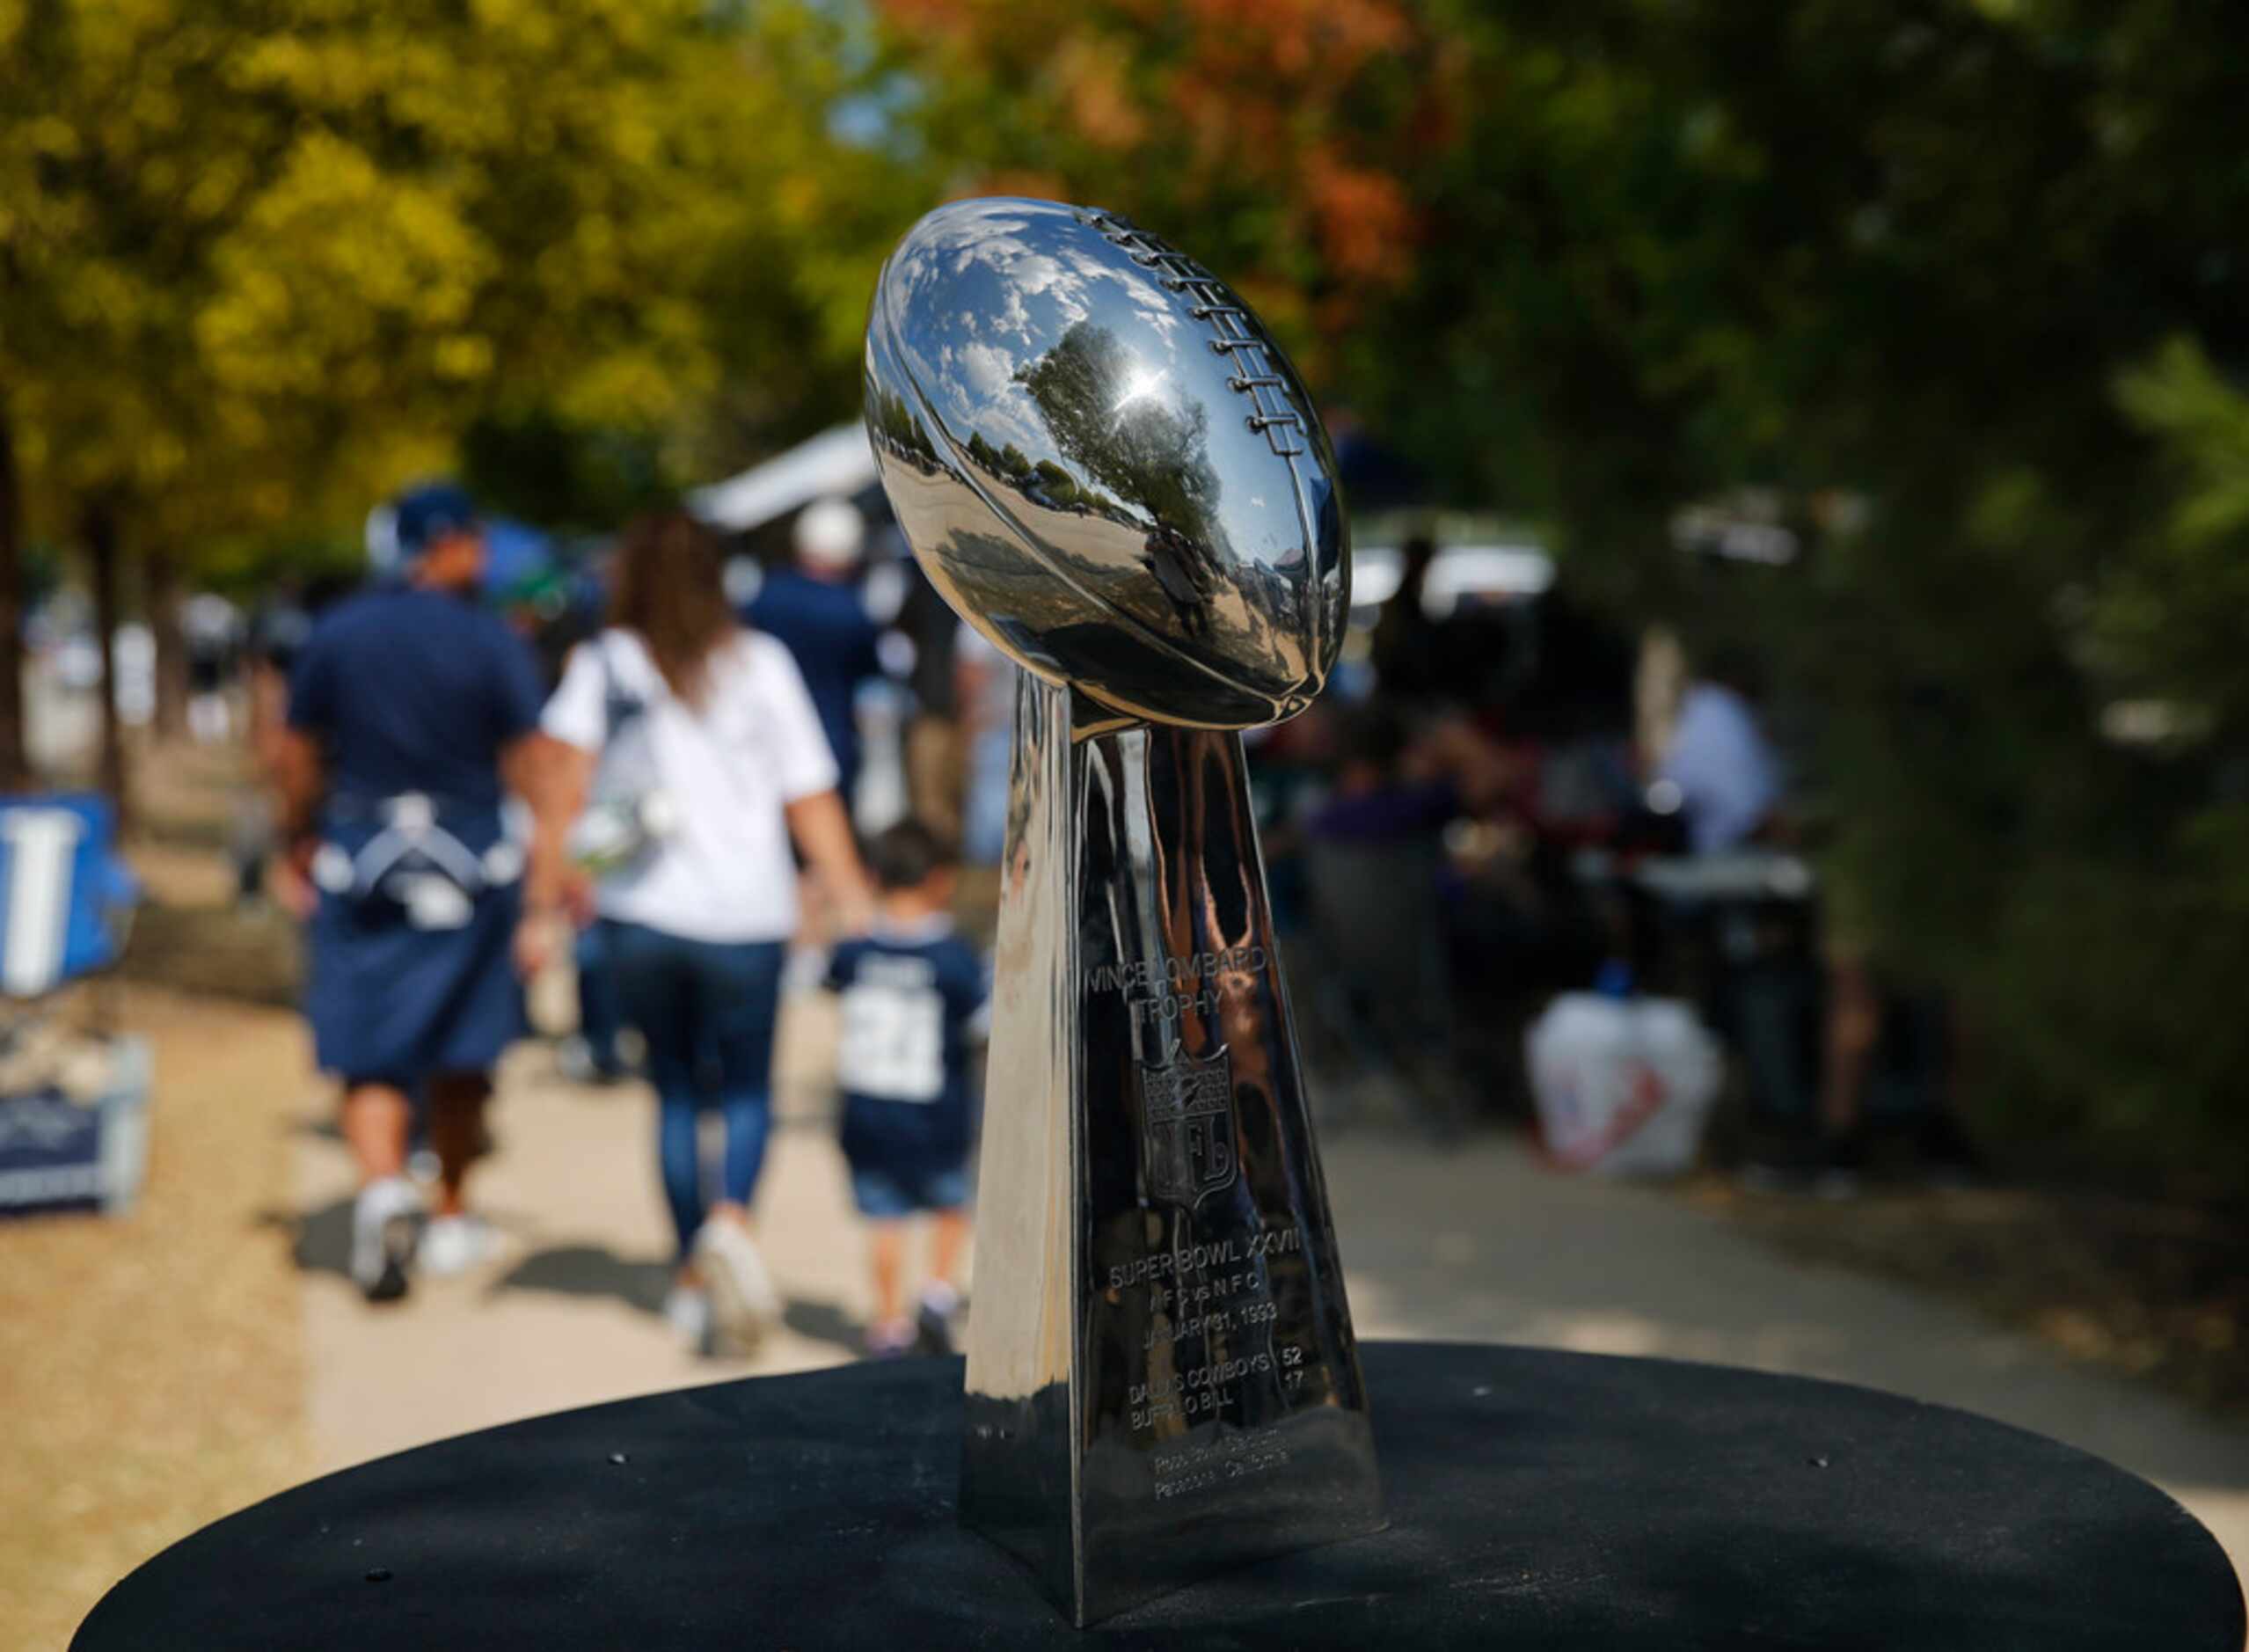 A replica of the Vince Lombardi trophy was on display at a tailgate party before the Green...